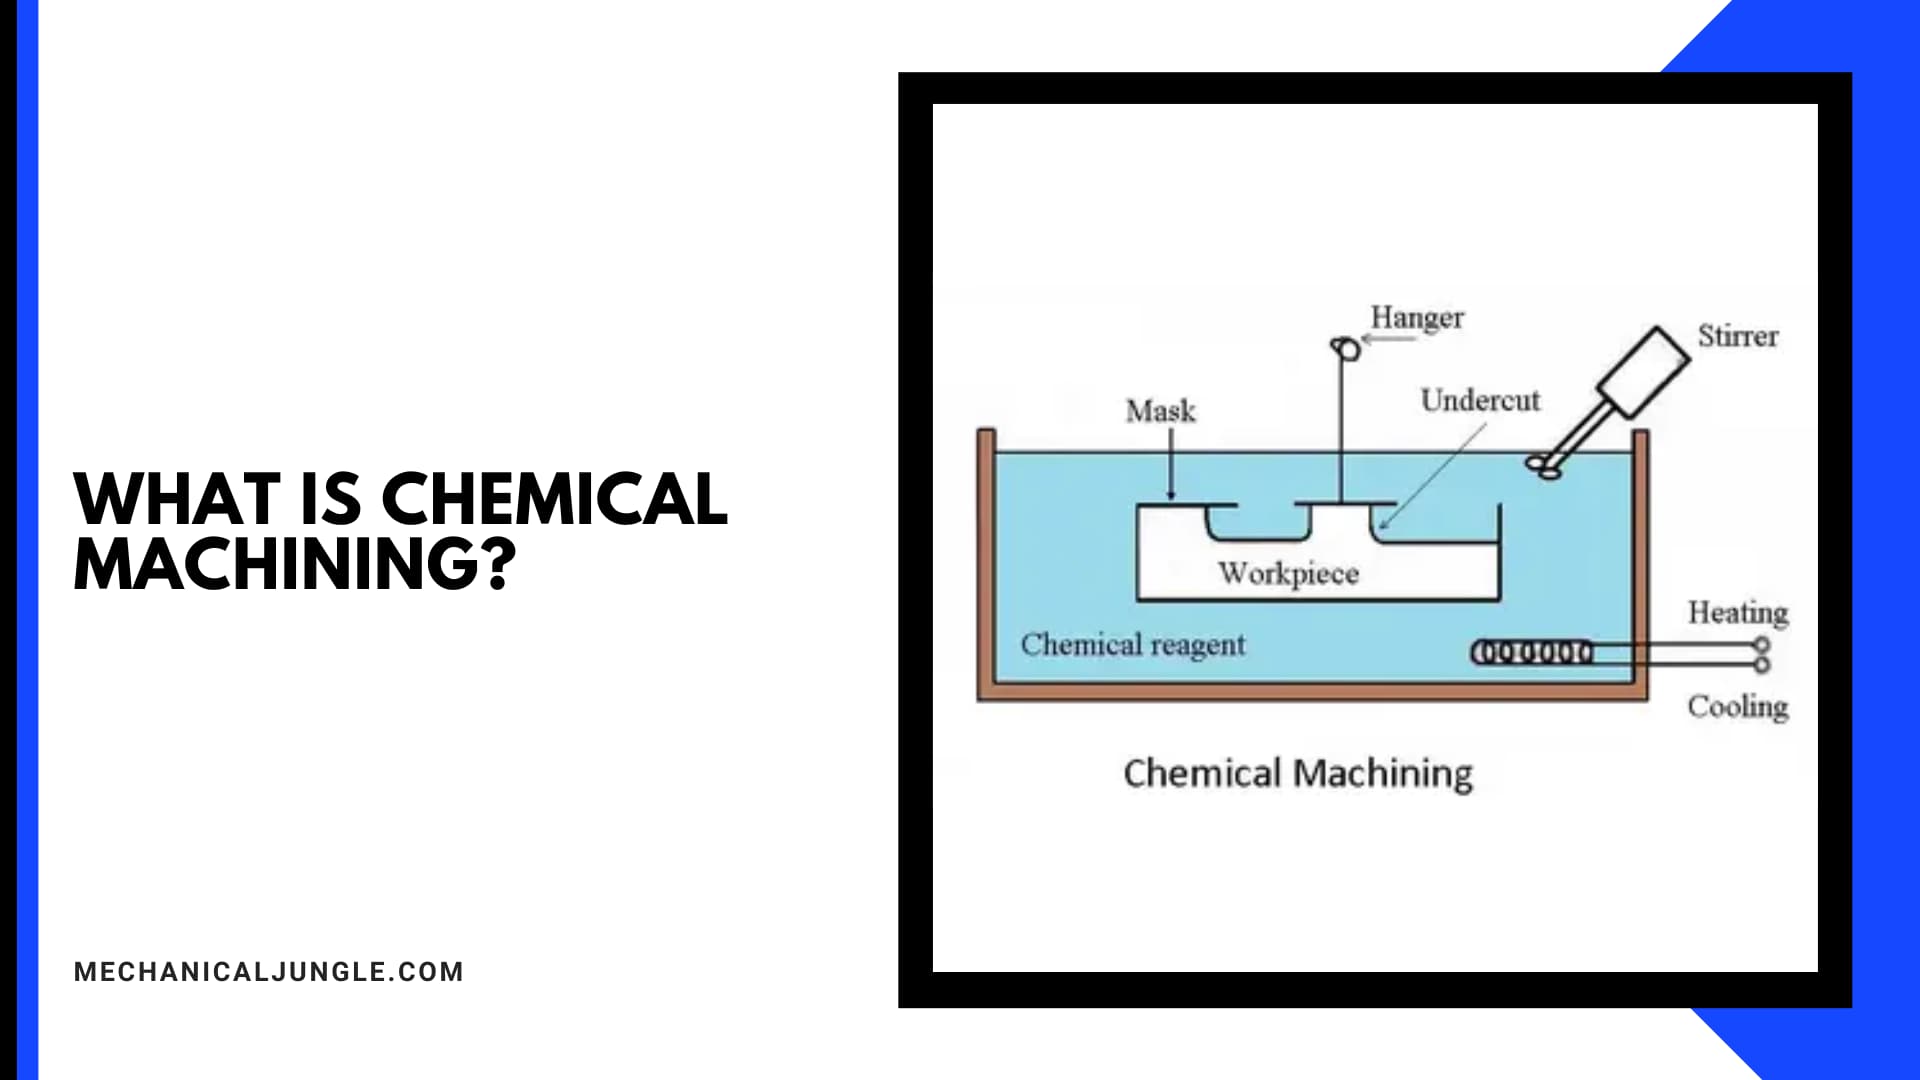 What Is Chemical Machining?